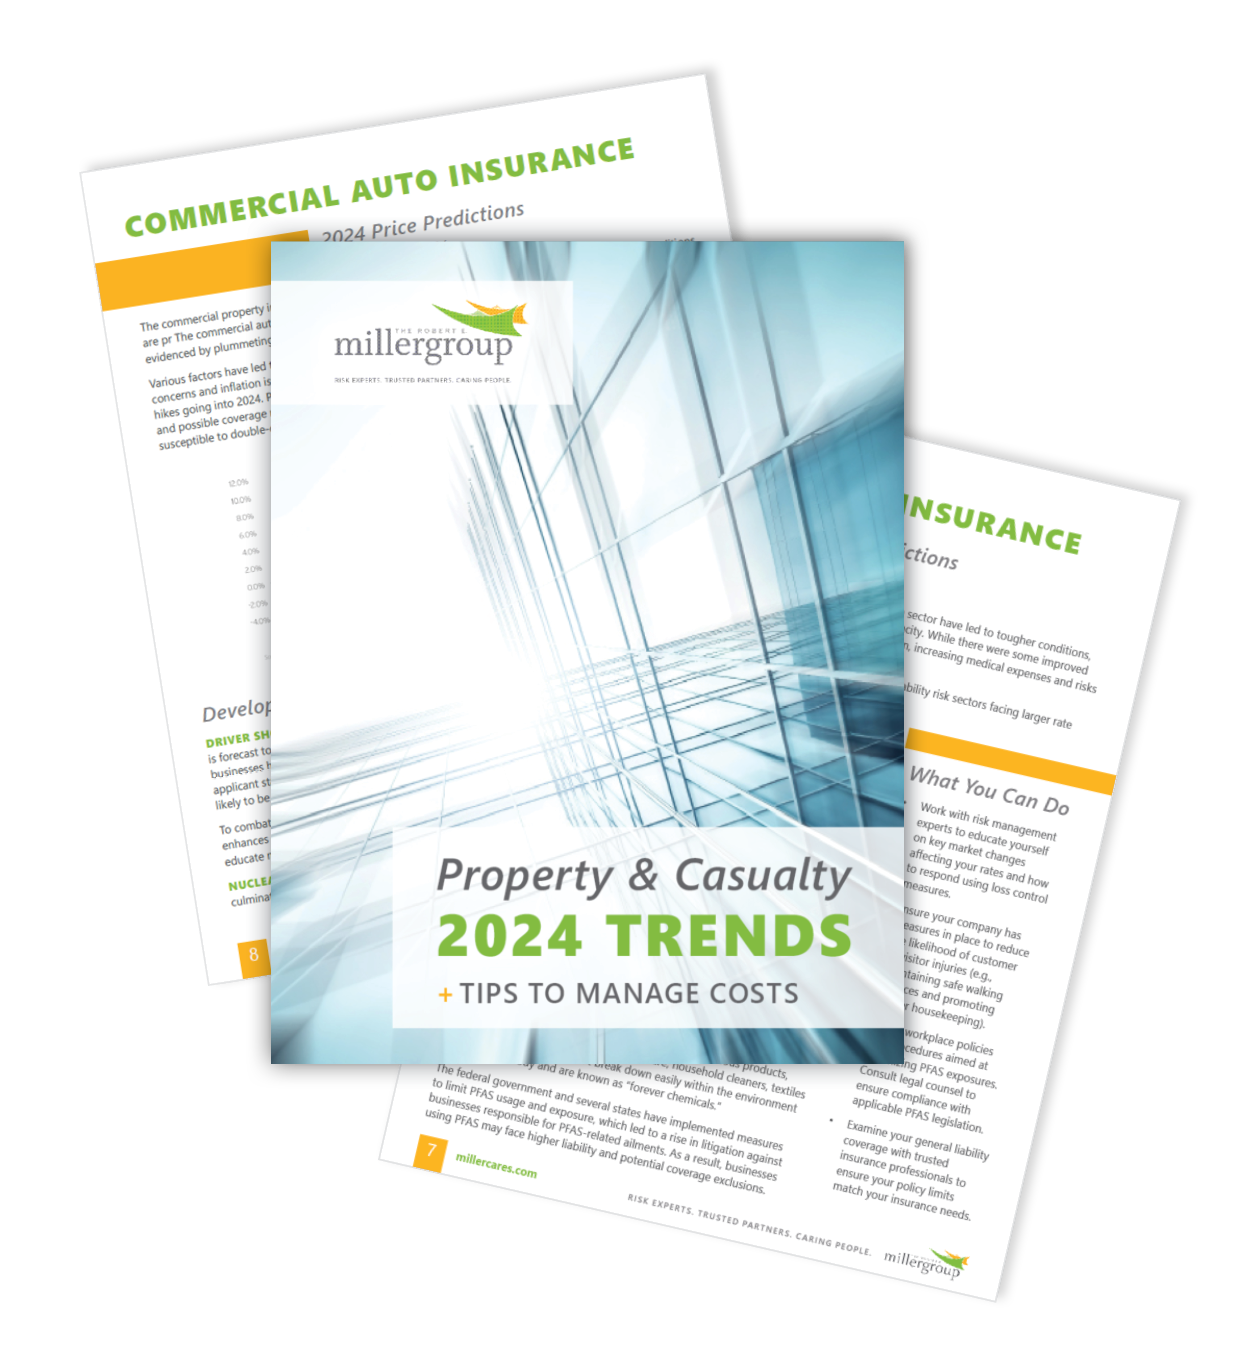 Preview images of the Property & Casualty 2024 Trends e-book.